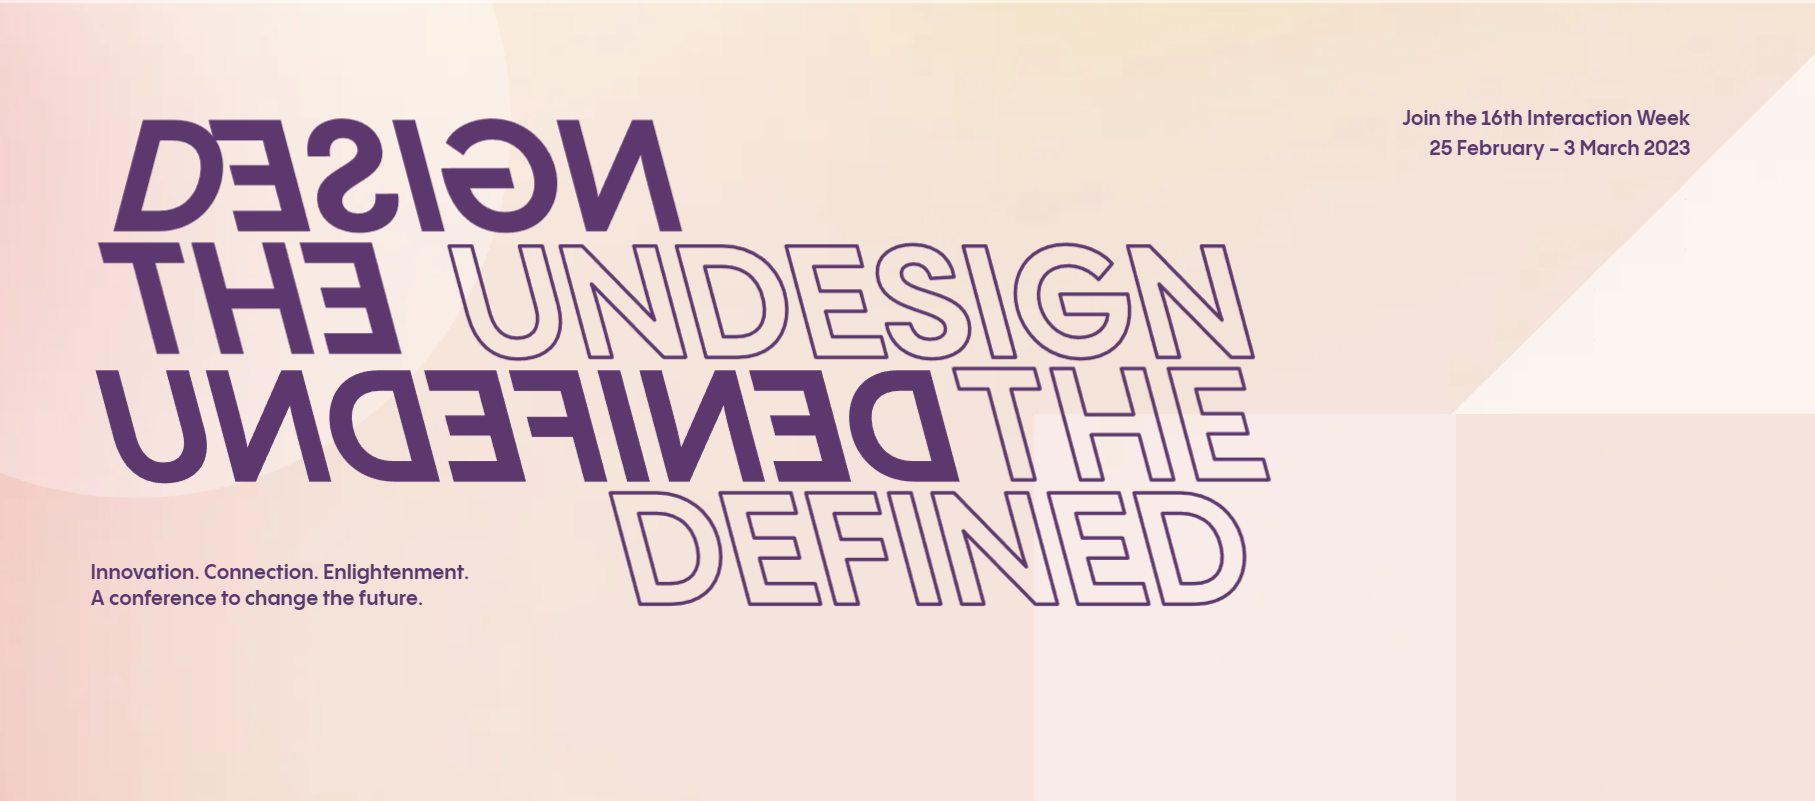 Design The Undefined